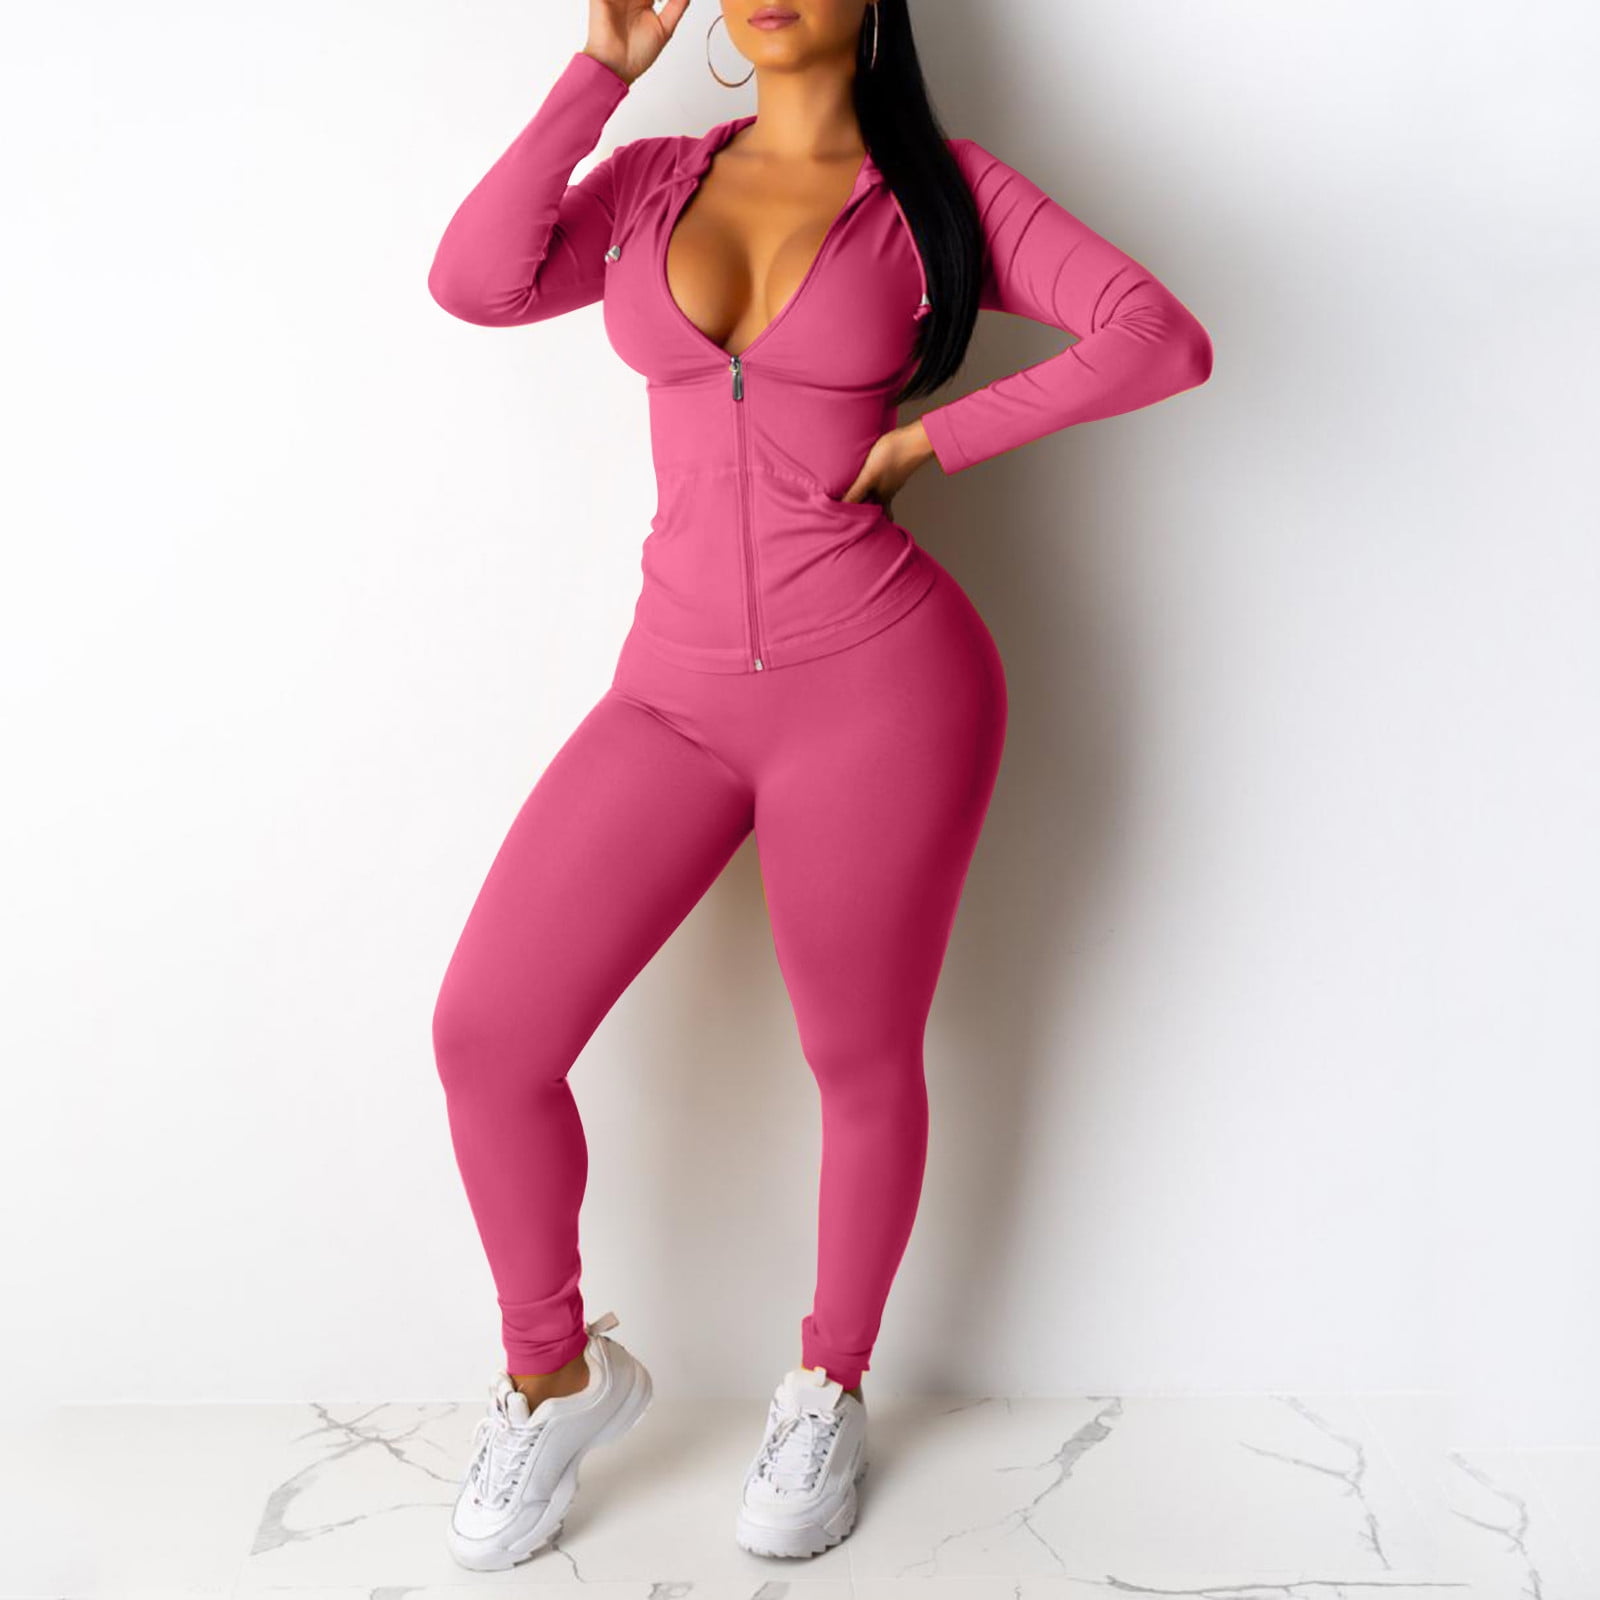 Ladies Zip Hooded Two Piece Activewear Long Sleeve Top And Casual Pants Set  Vest Skirt Suit Women Dress Suites Graduation Outfits Woman Casual Pants  Suits Women Party Outfits Smart Casual Outfit 